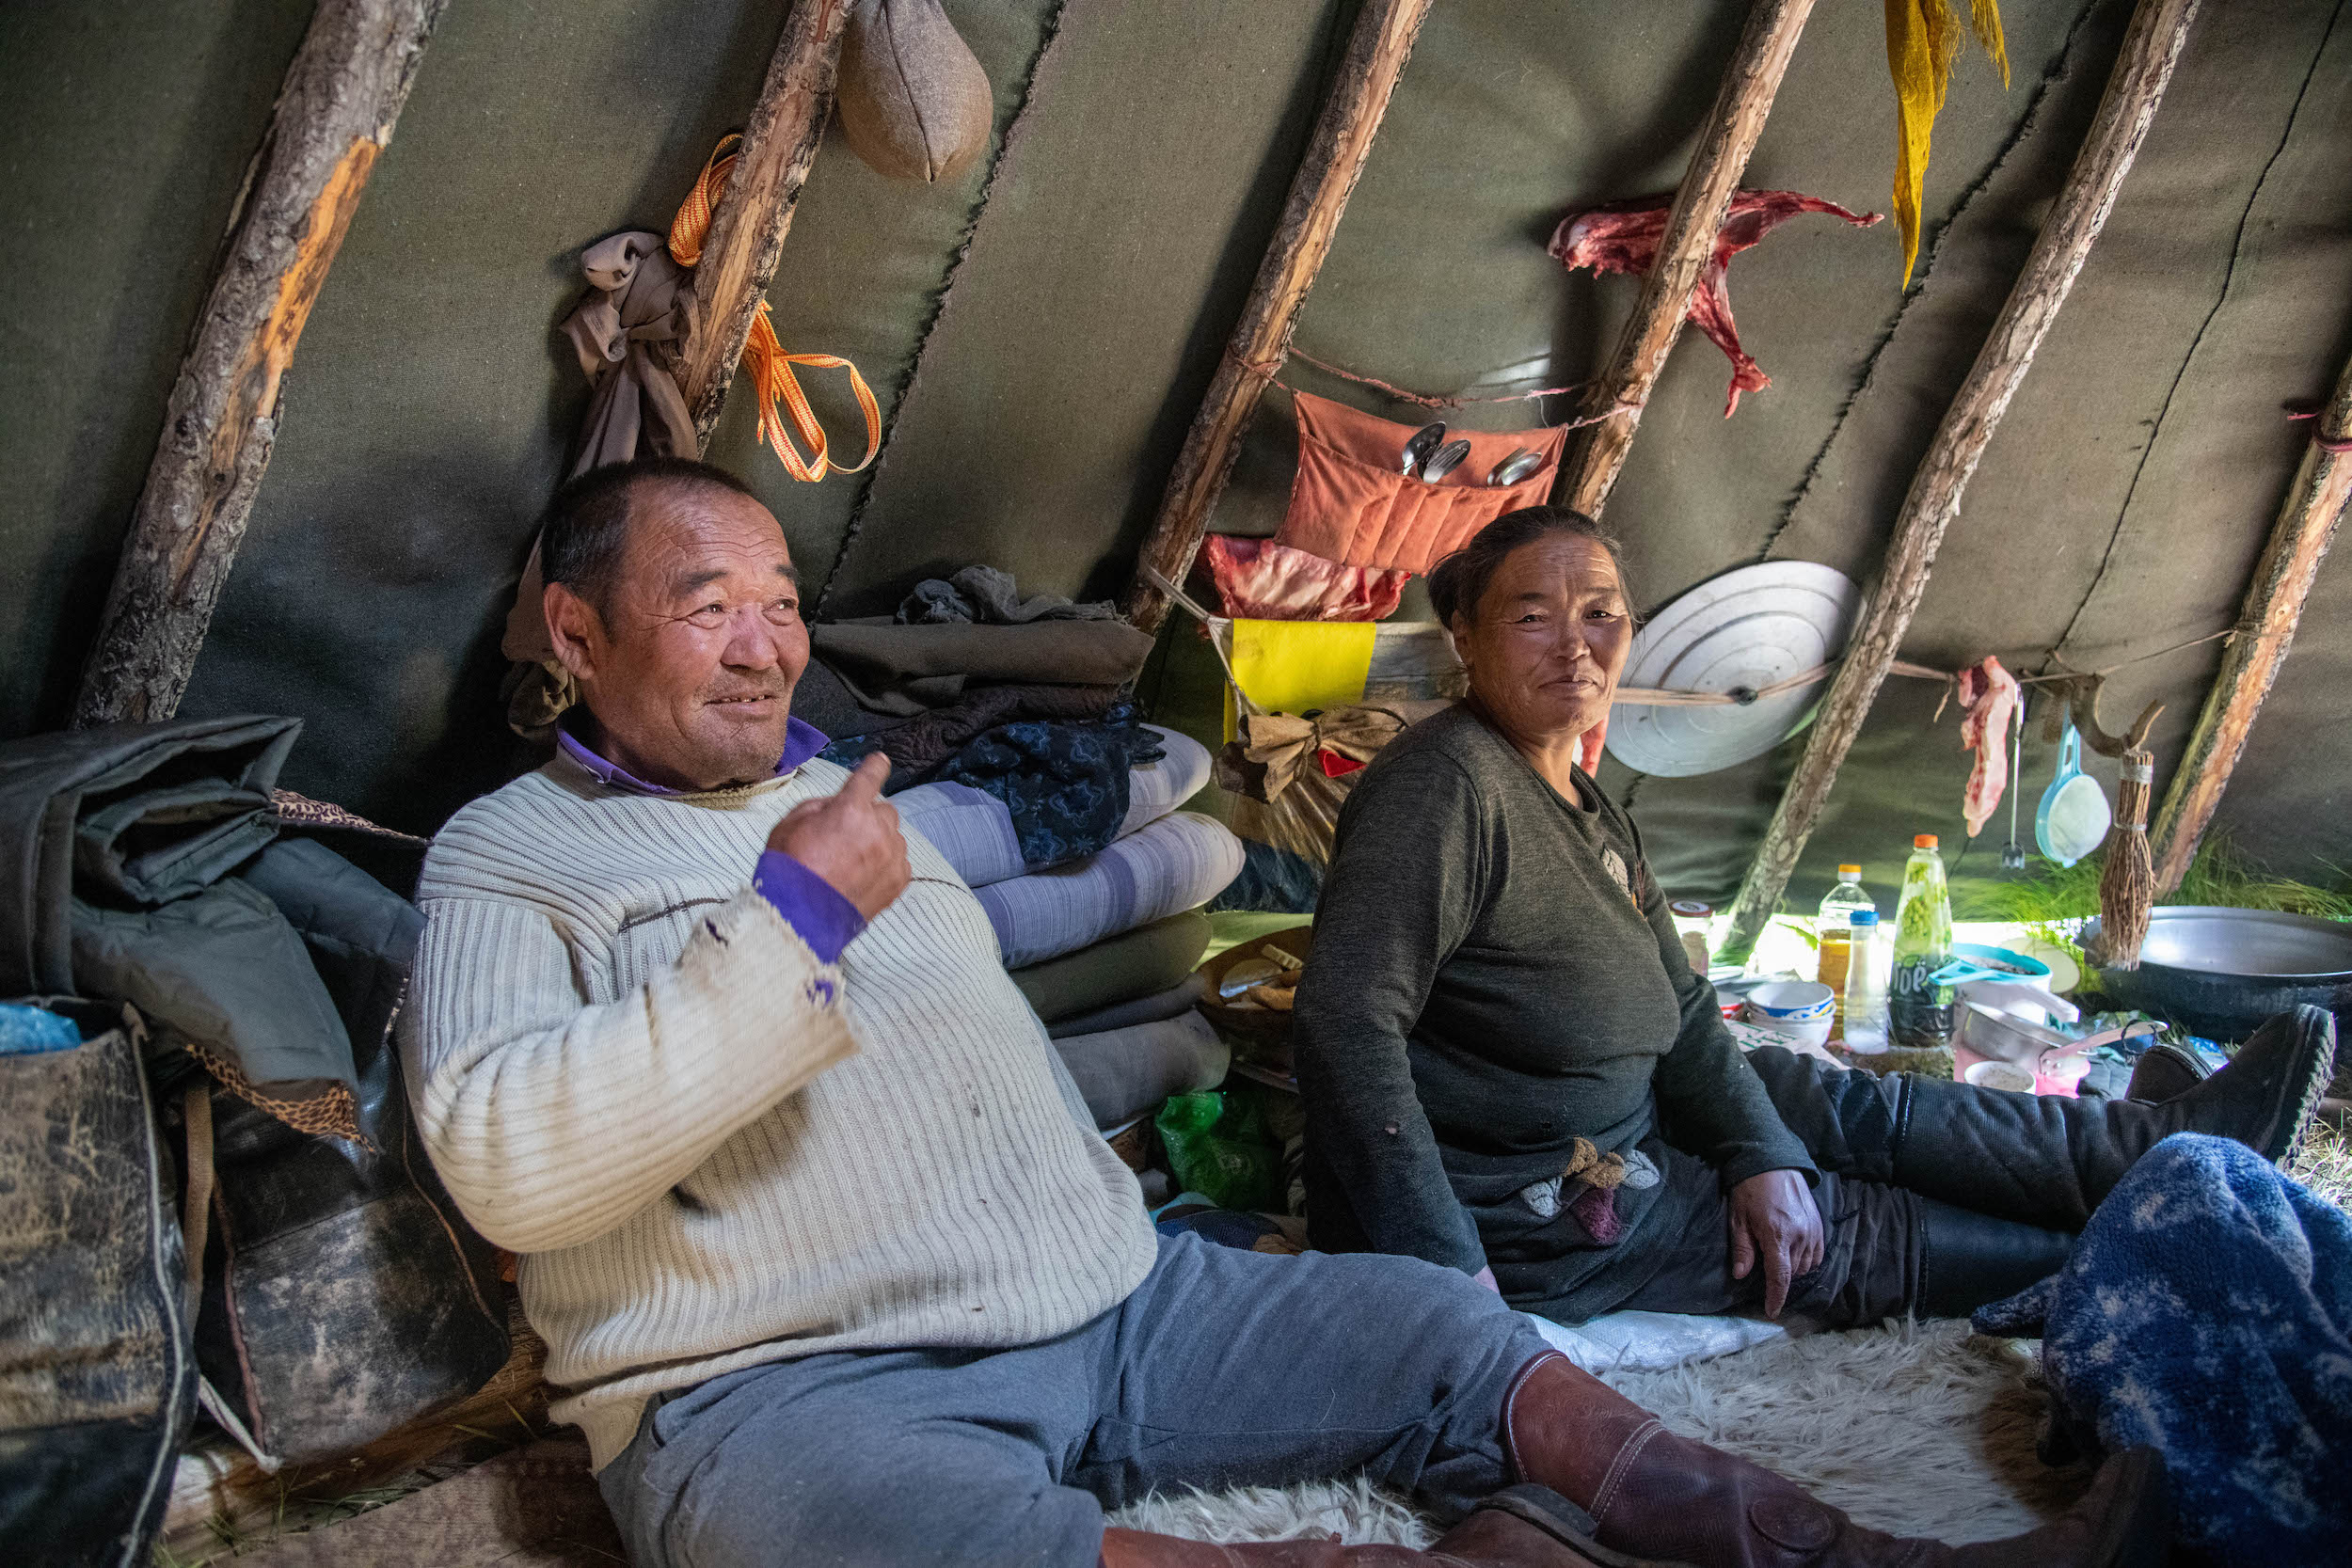 Two Tuvan reindeer herders, Mandah and Oyunaa, sit inside a tent made of wood posts and tarps.